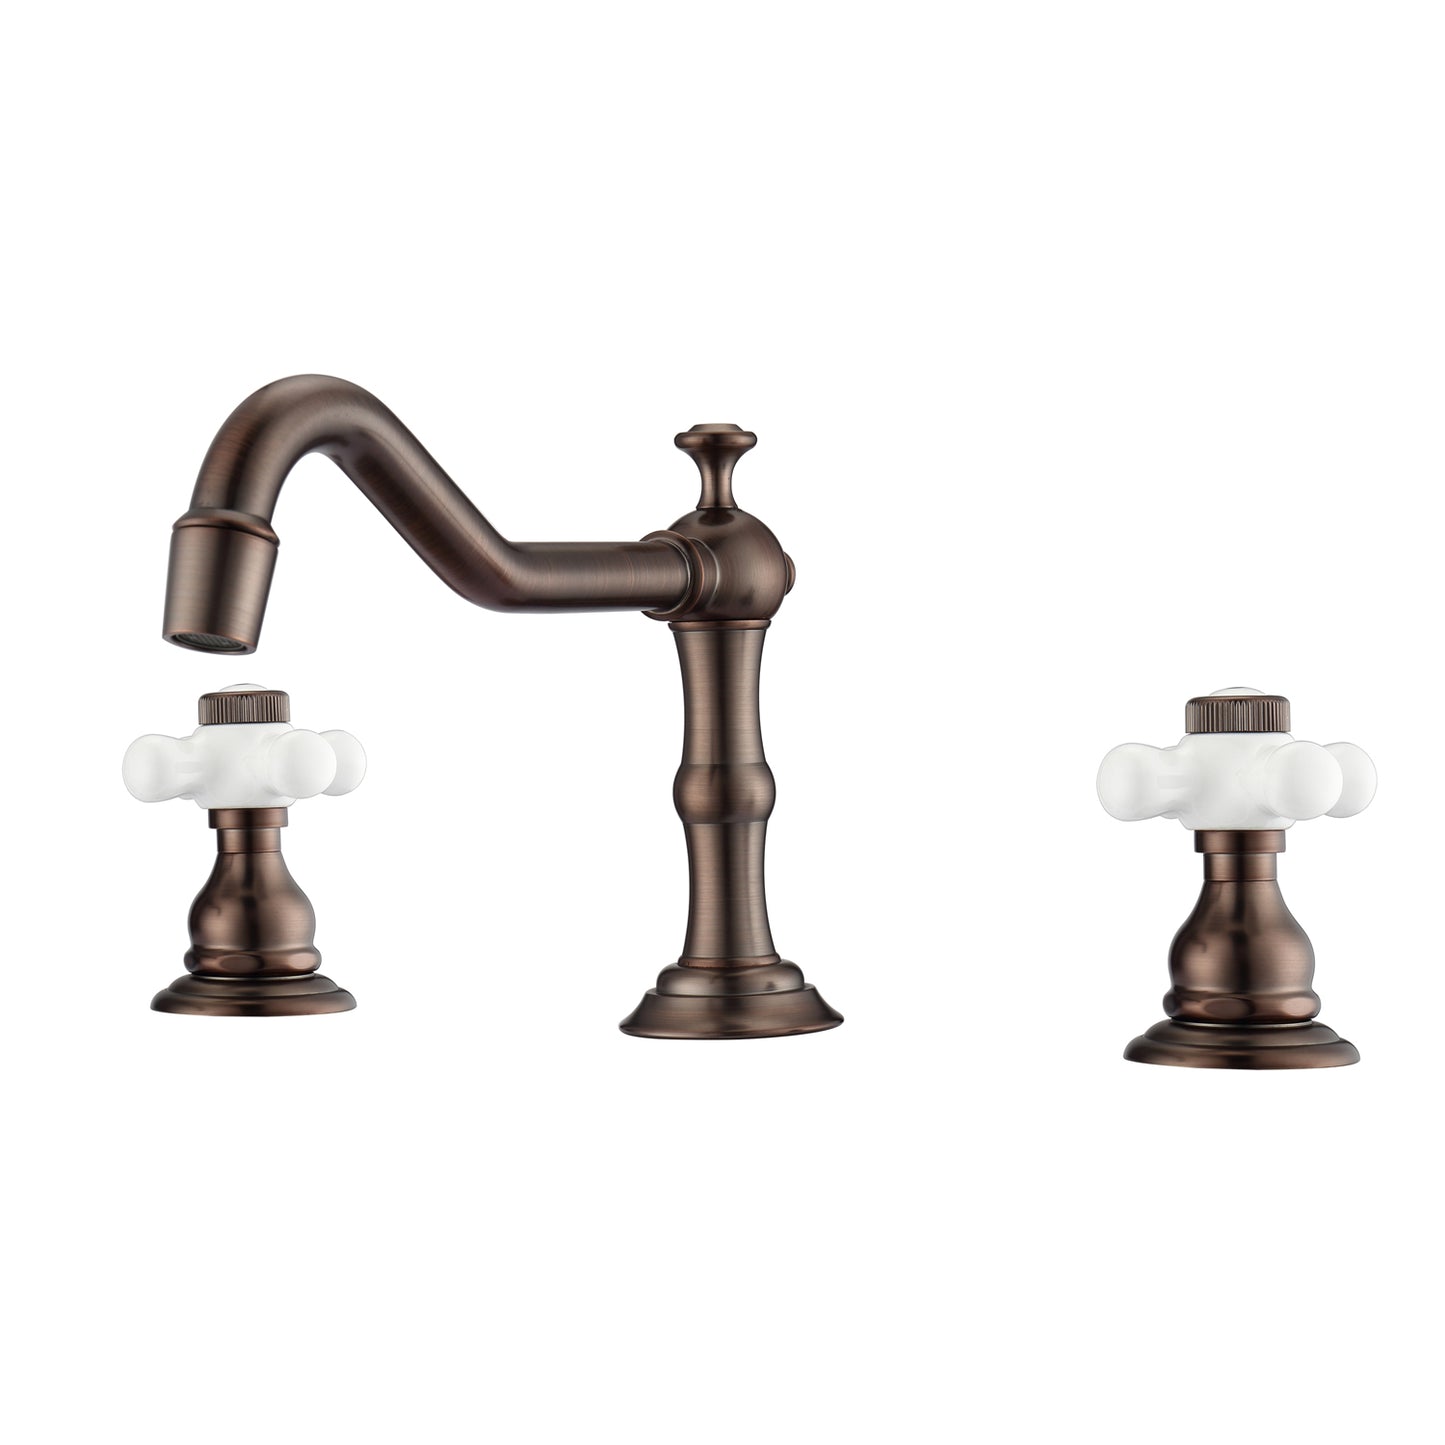 Roma 8" Widespread Oil Rubbed Bronze Bathroom Faucet with Porcelain Cross Handles